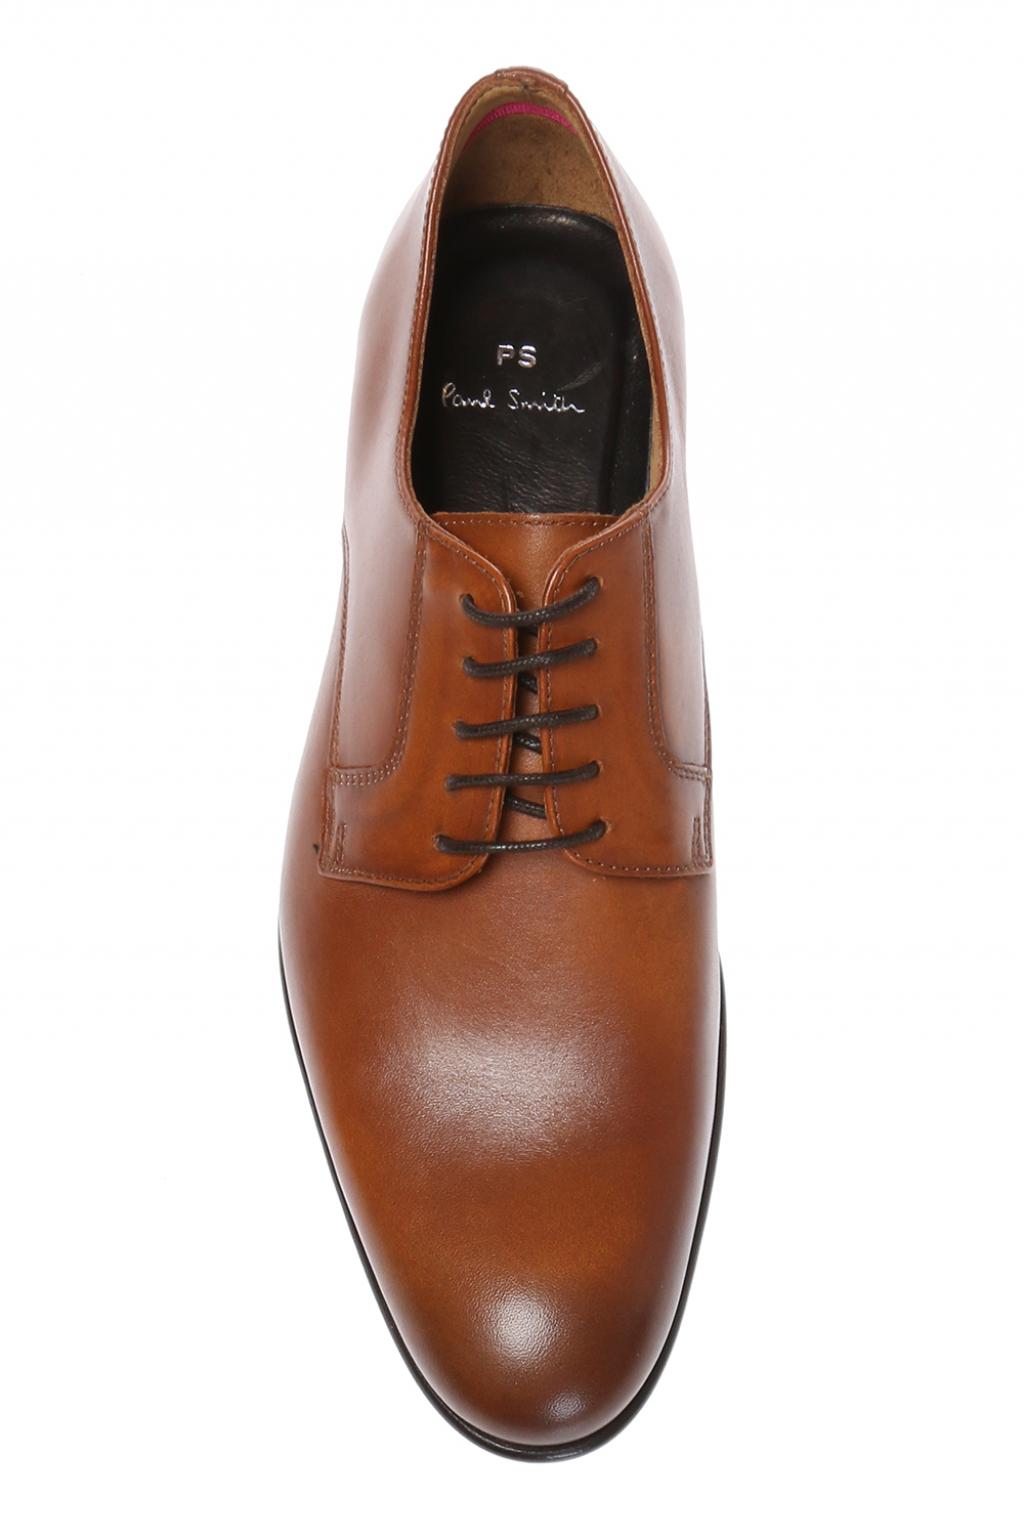 paul smith derby shoes